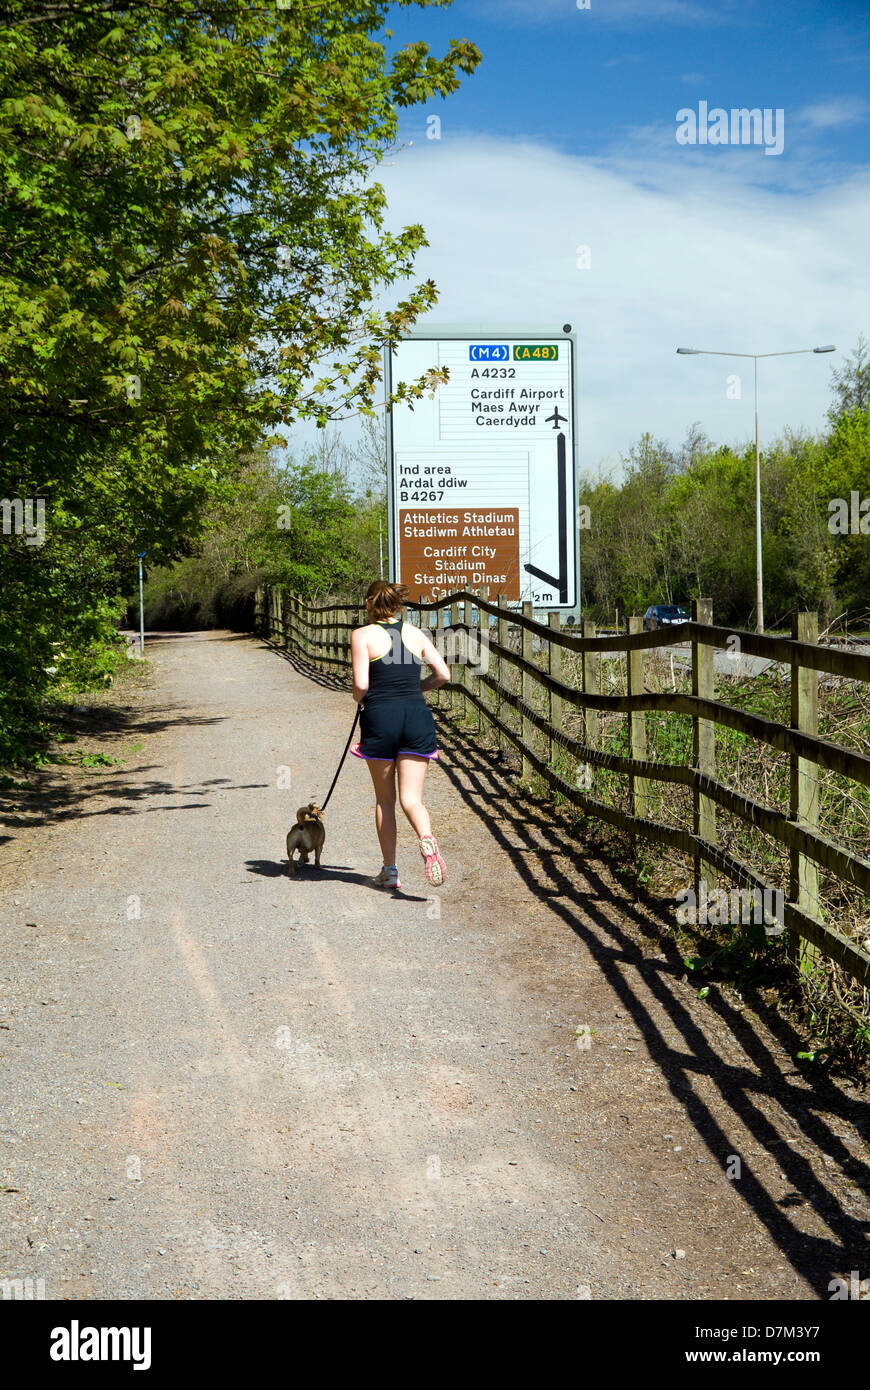 girl with dog running along ely trail besides A4232 grangetown link road cardiff wales Stock Photo